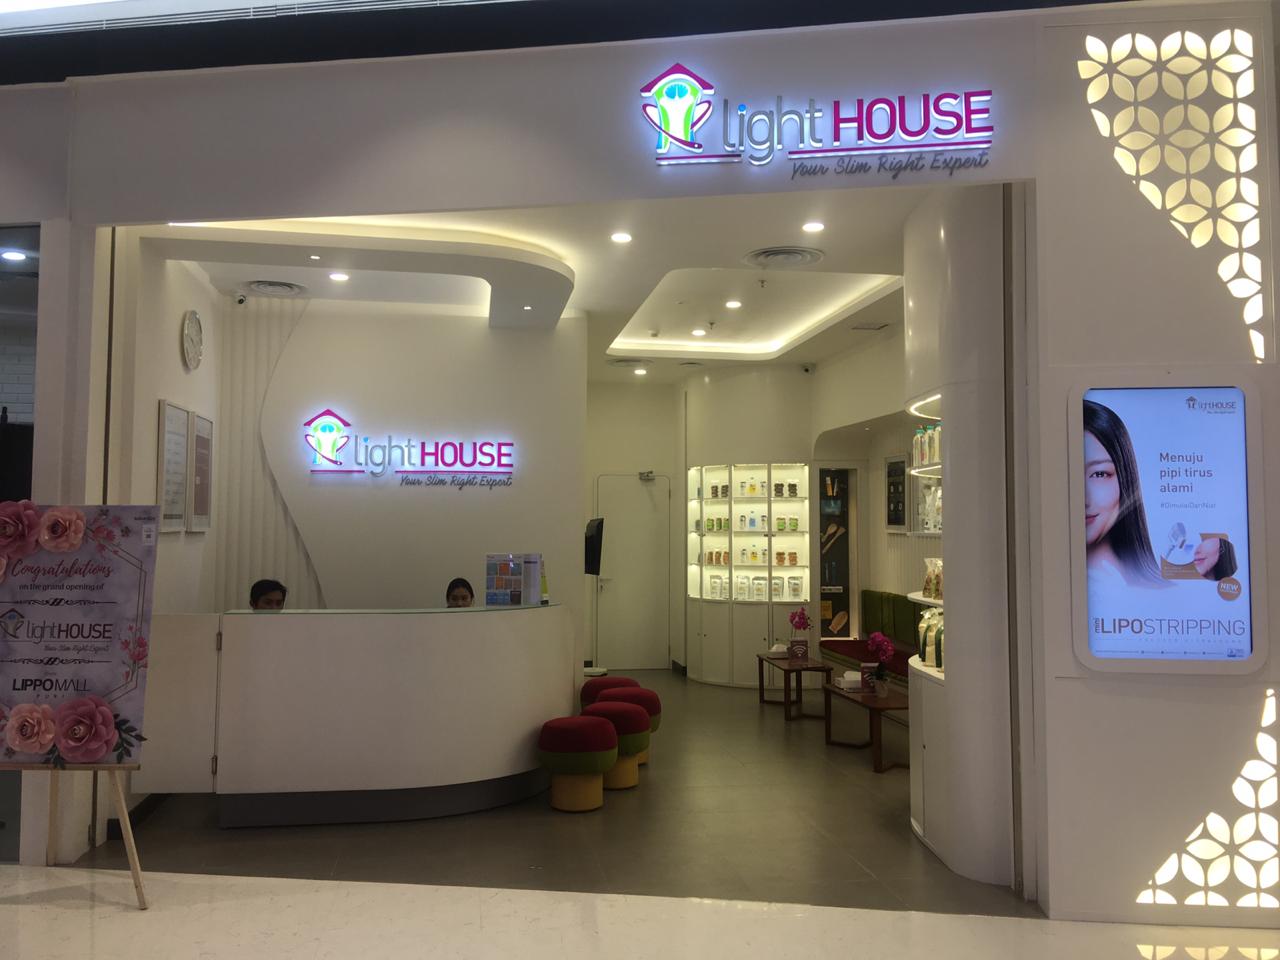 Light House shop front in lippo mall puri st. moritz